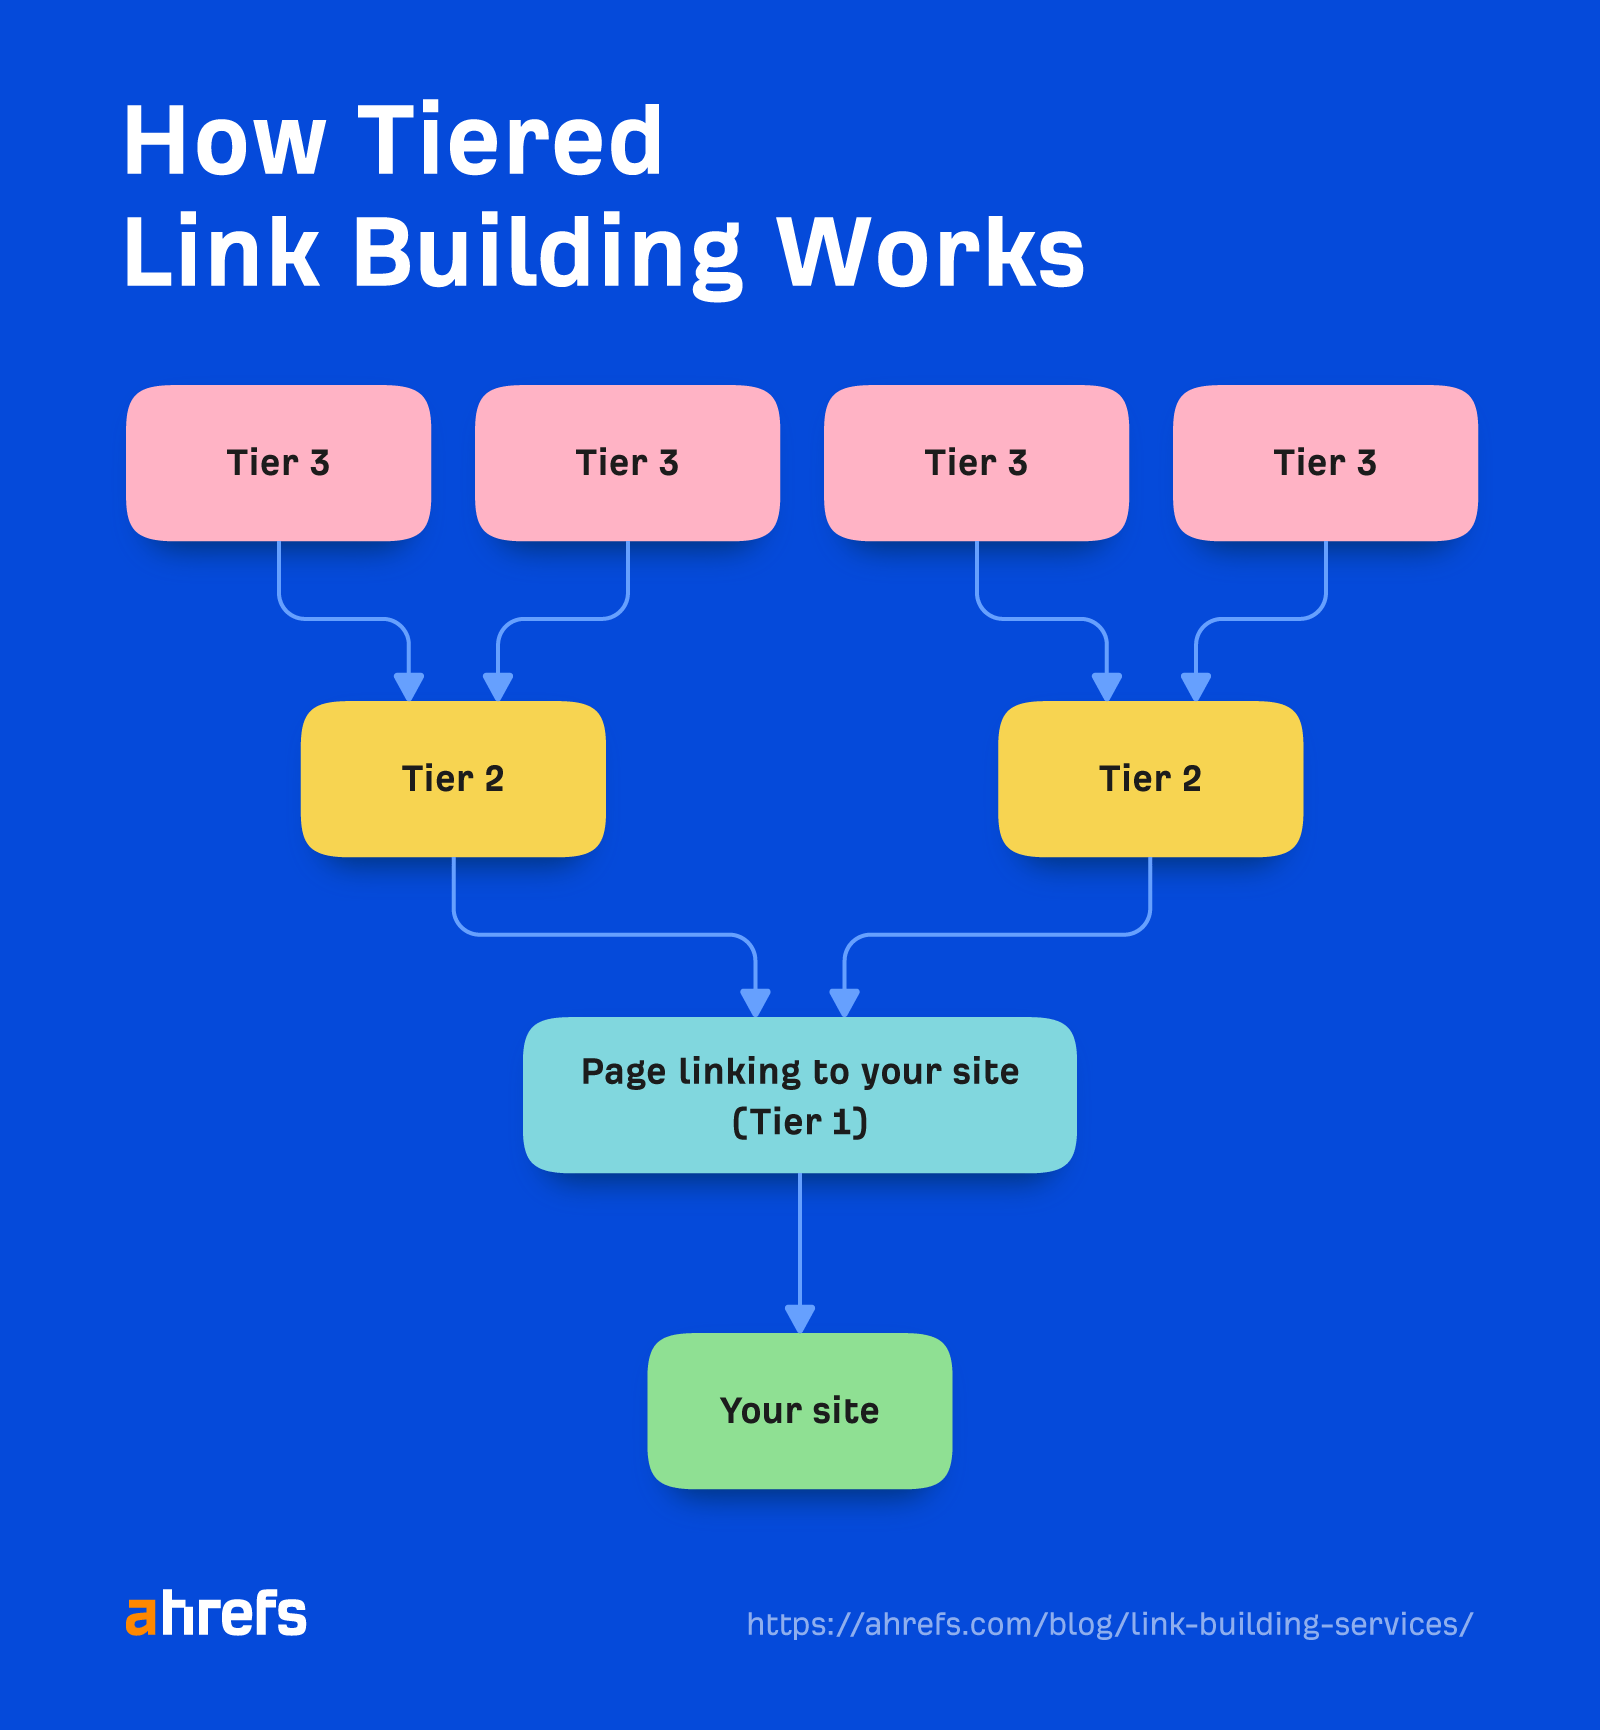 How tiered link building works